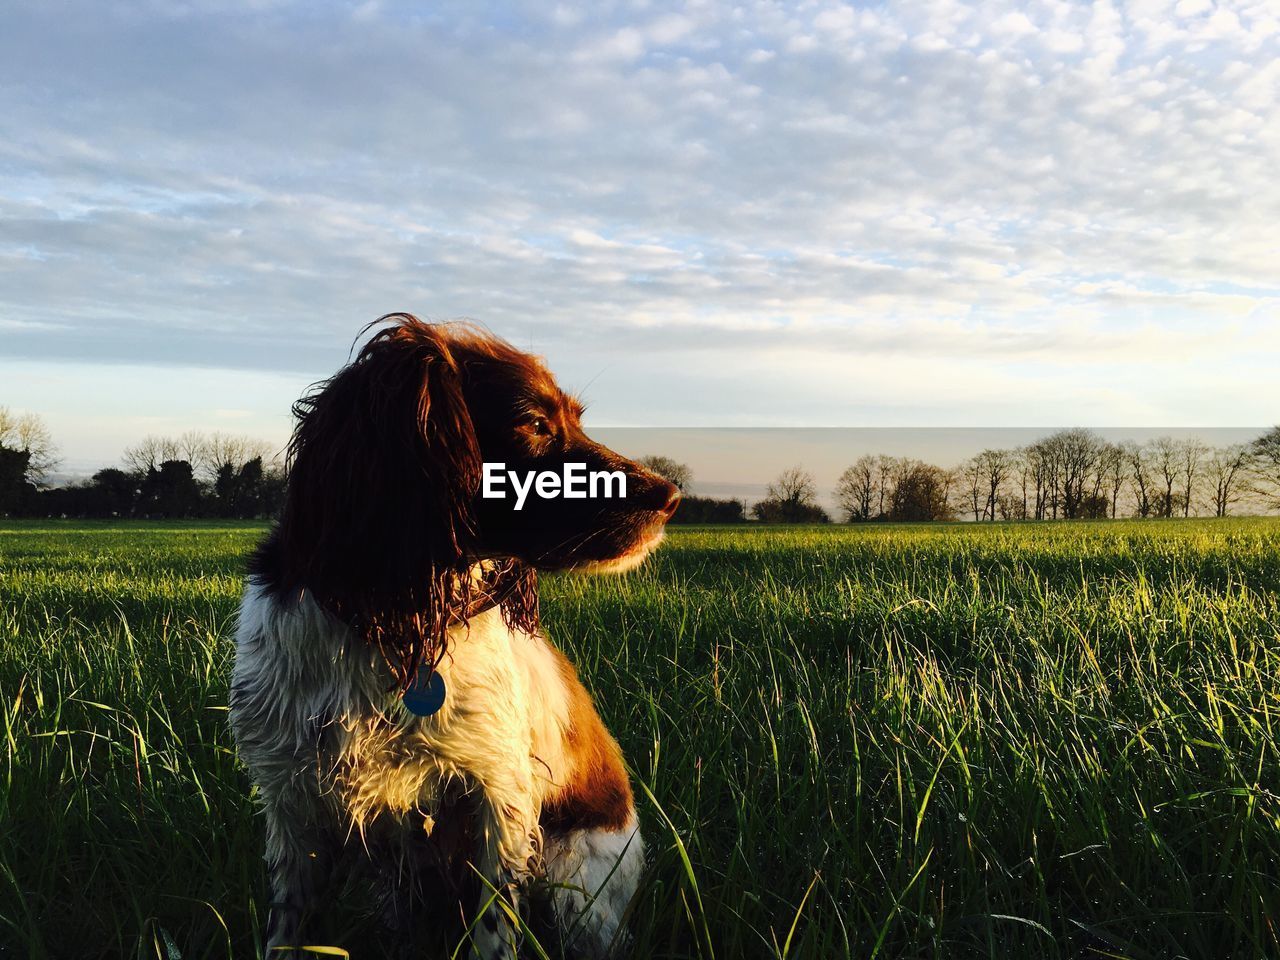 English cocker spaniel sitting on grassy field against sky during sunset